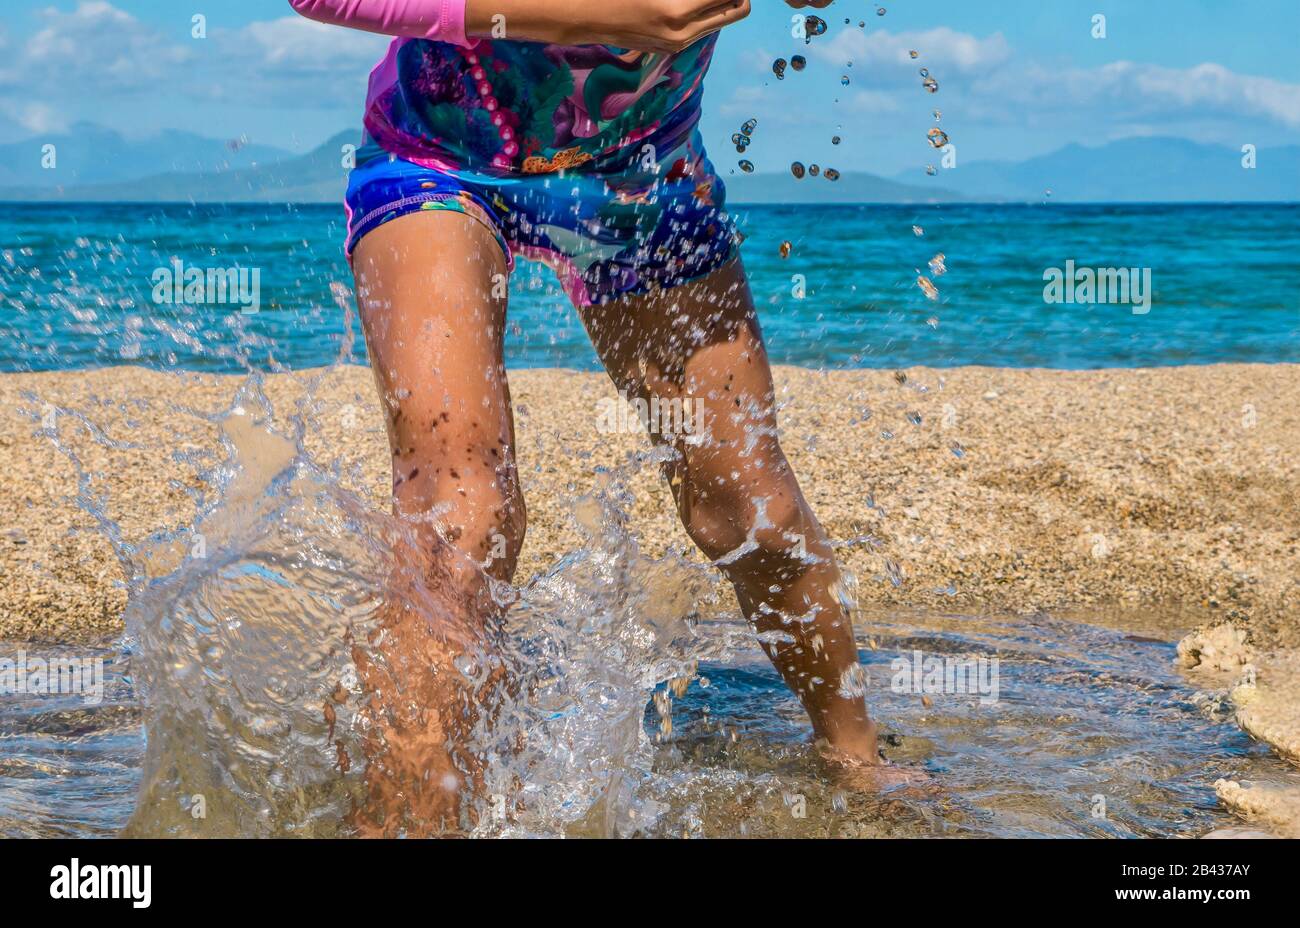 Action shot of an unidentifiable girl having fun, playfully splashing in the water during a summer holiday on an island beach. Legs and waist visible. Stock Photo